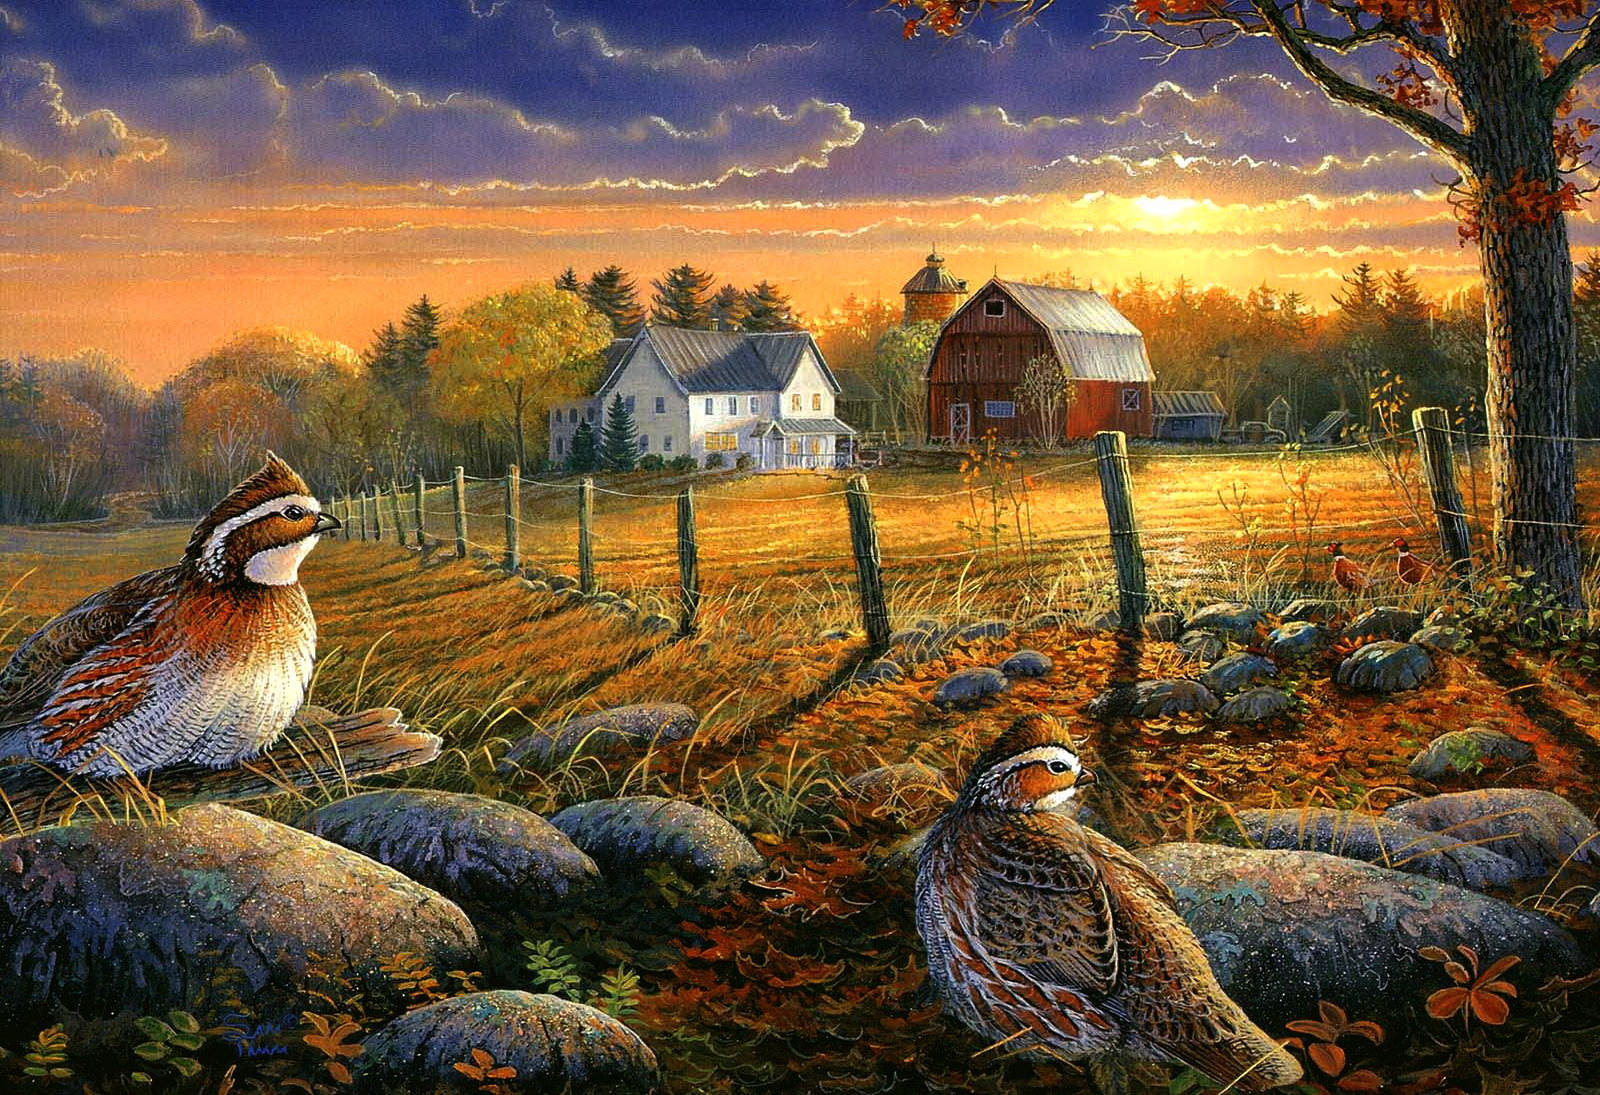 Relax And Reconnect With Nature - Enjoy The Splendor Of Fall On A Farm Wallpaper